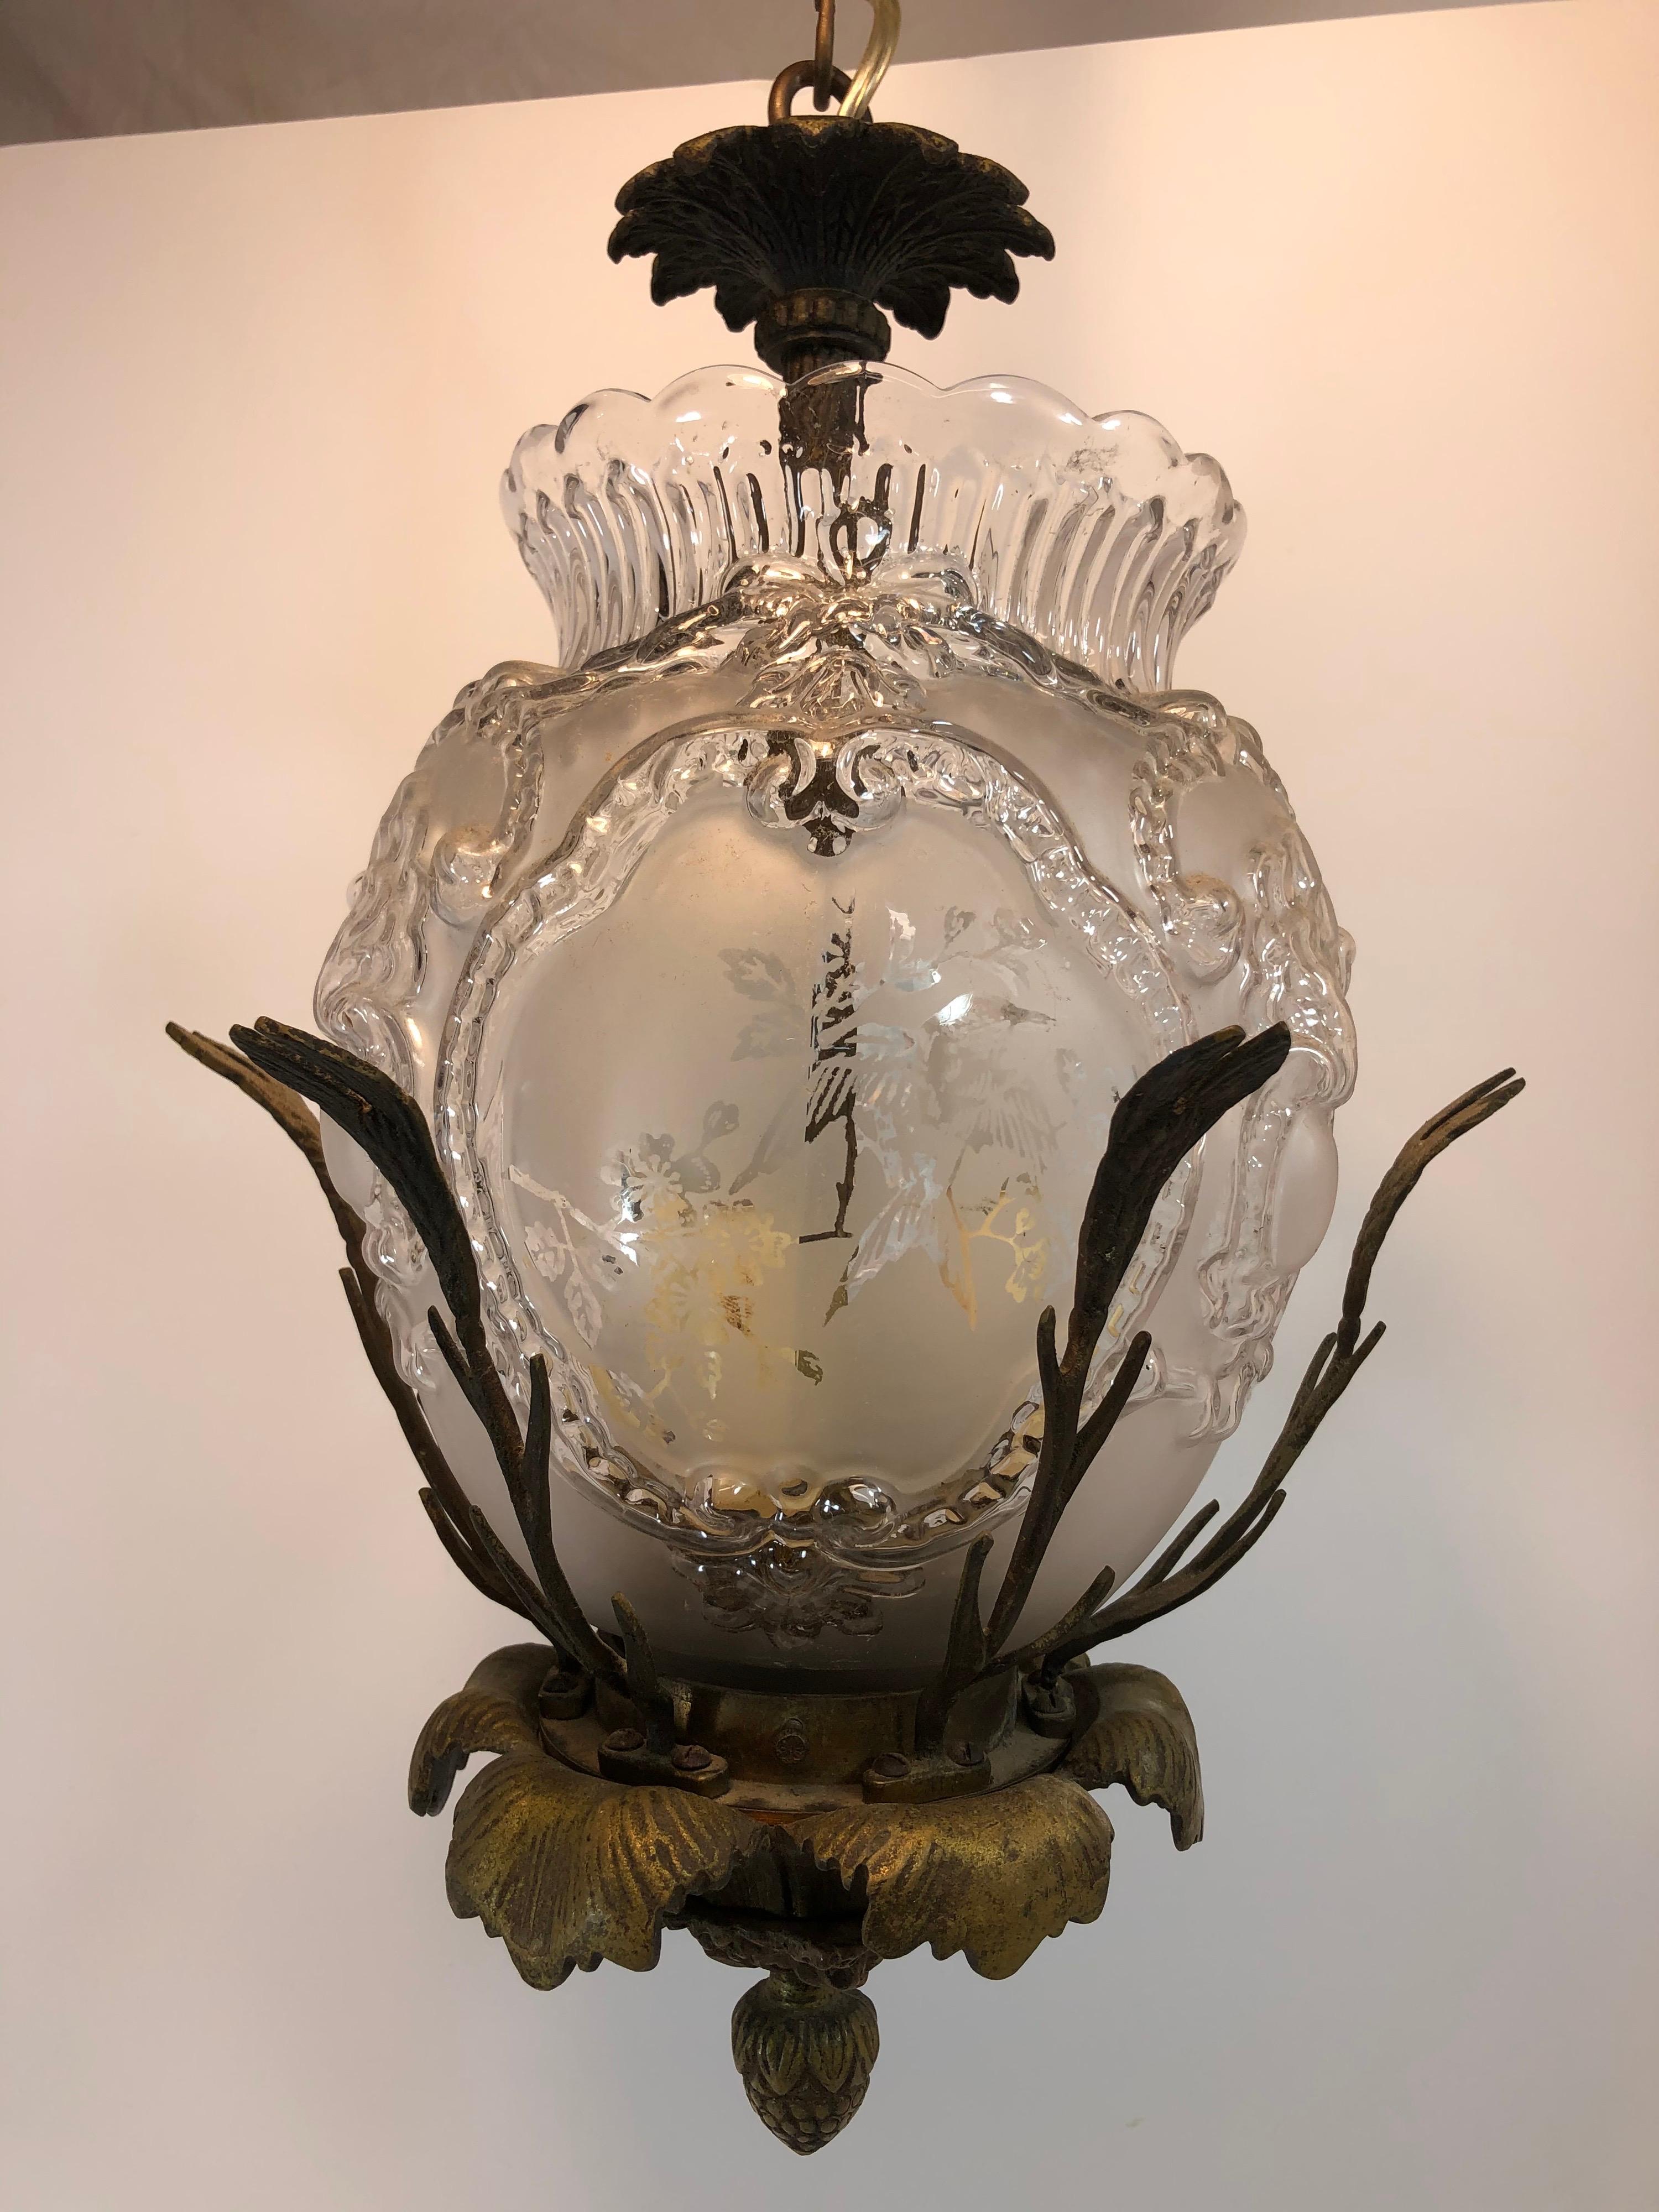 Hummingbird chandelier with cast bronze frame and pressed, etched glass shade. Three candelabra sockets. Looks to be rewired. Hummingbirds are on three sides of the glass with nice detail to the glass. Hard to capture detail in photos. Without chain